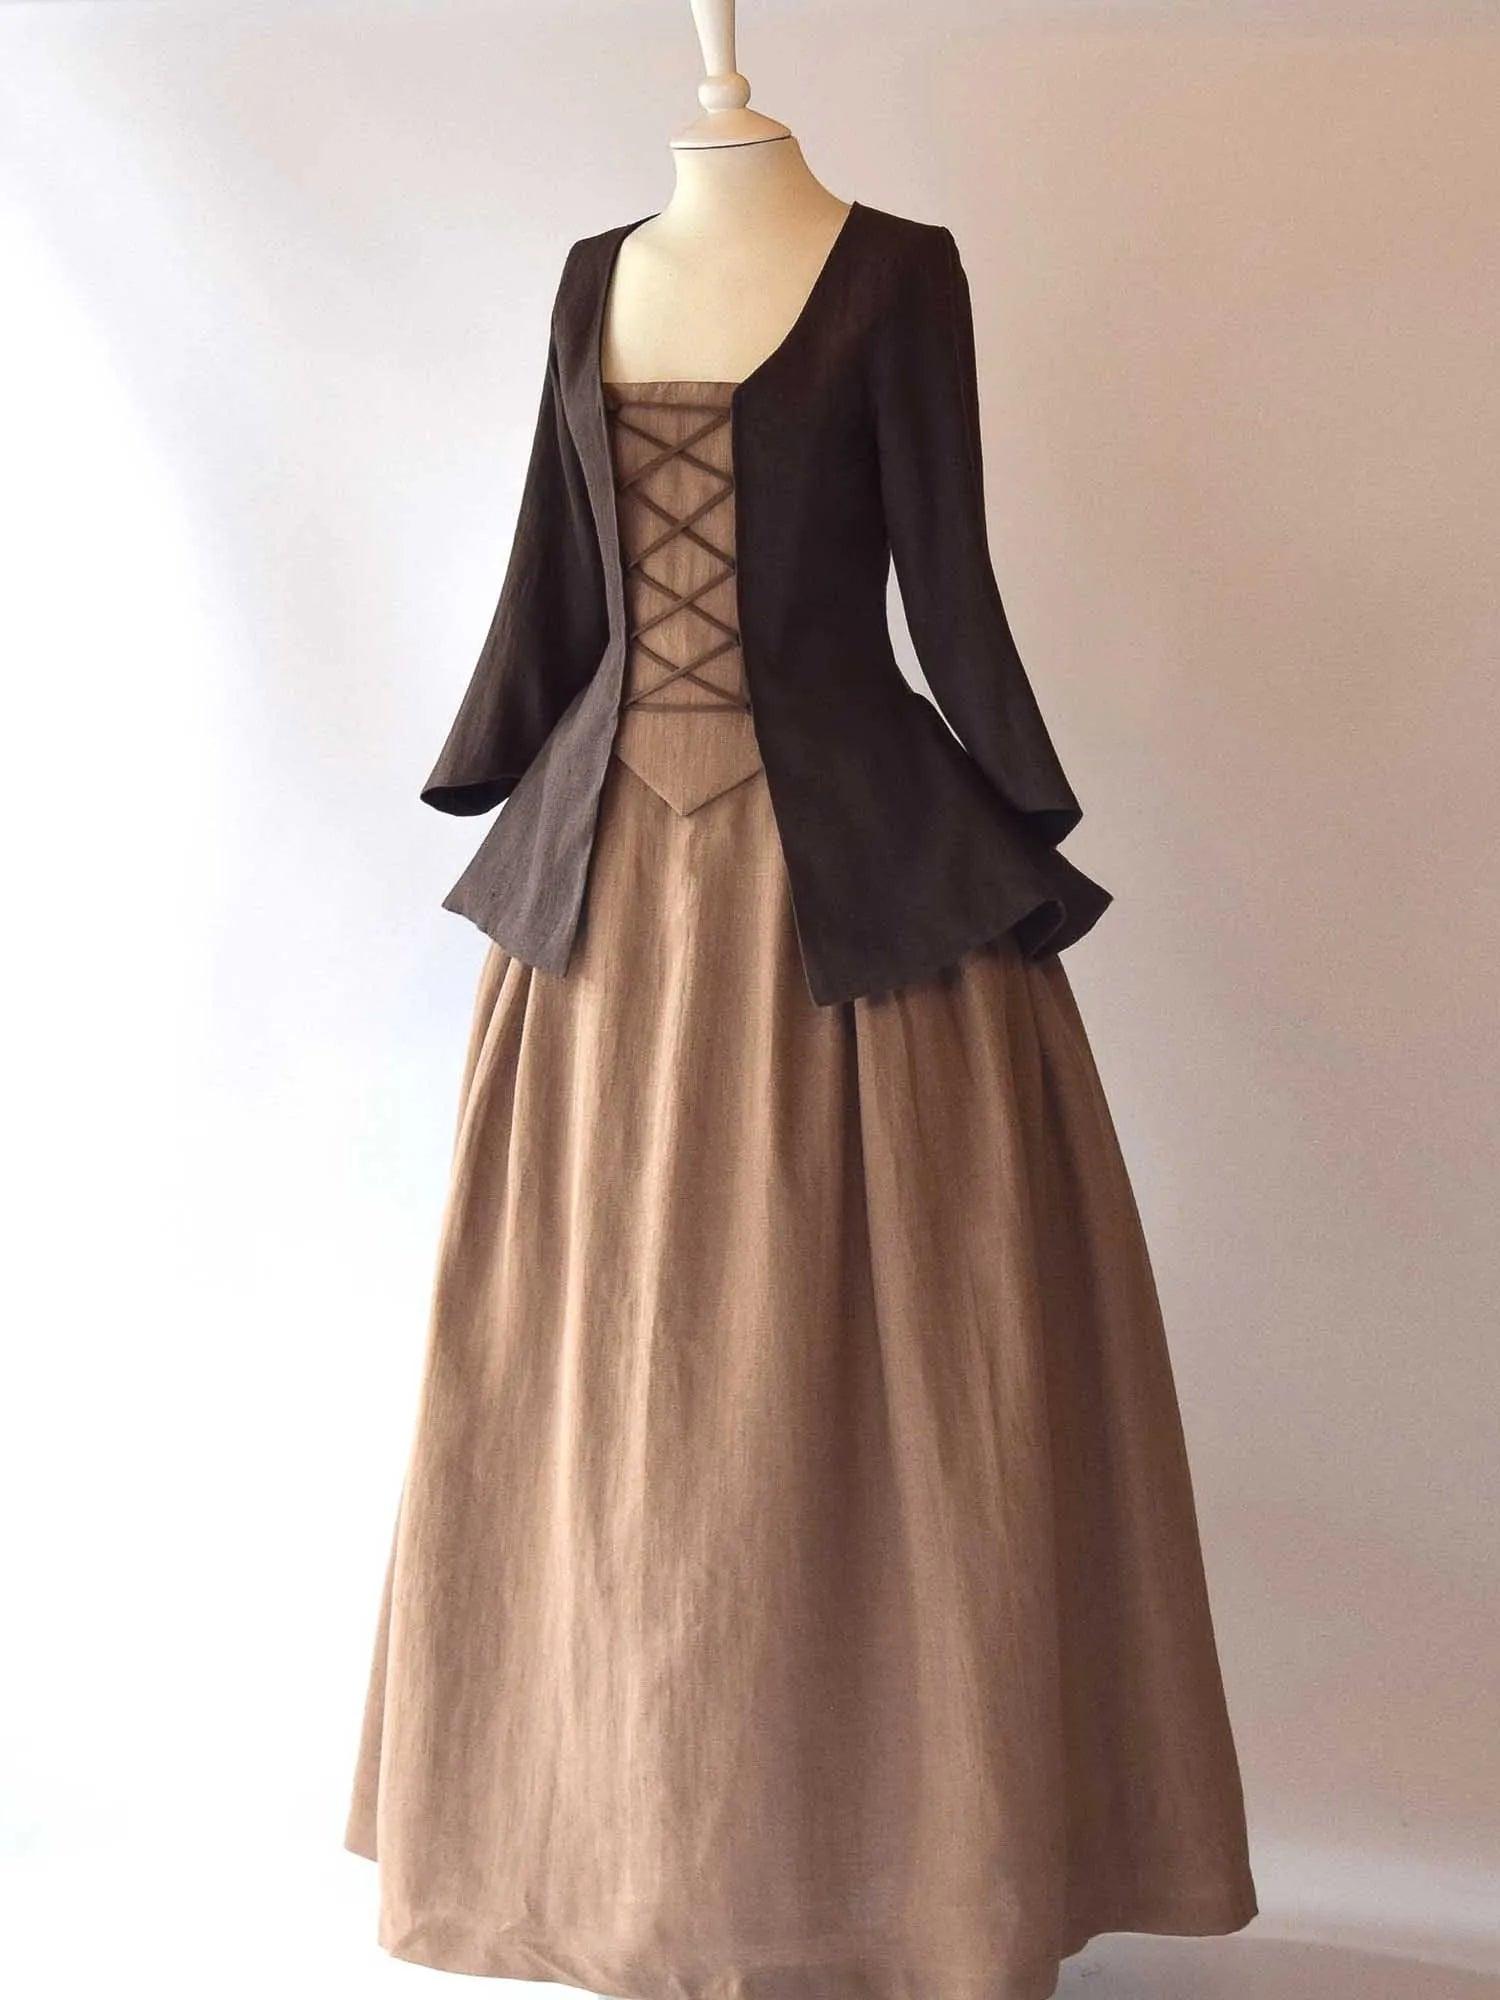 JANET, Colonial Costume in Chocolate & Toffee Linen - Atelier Serraspina